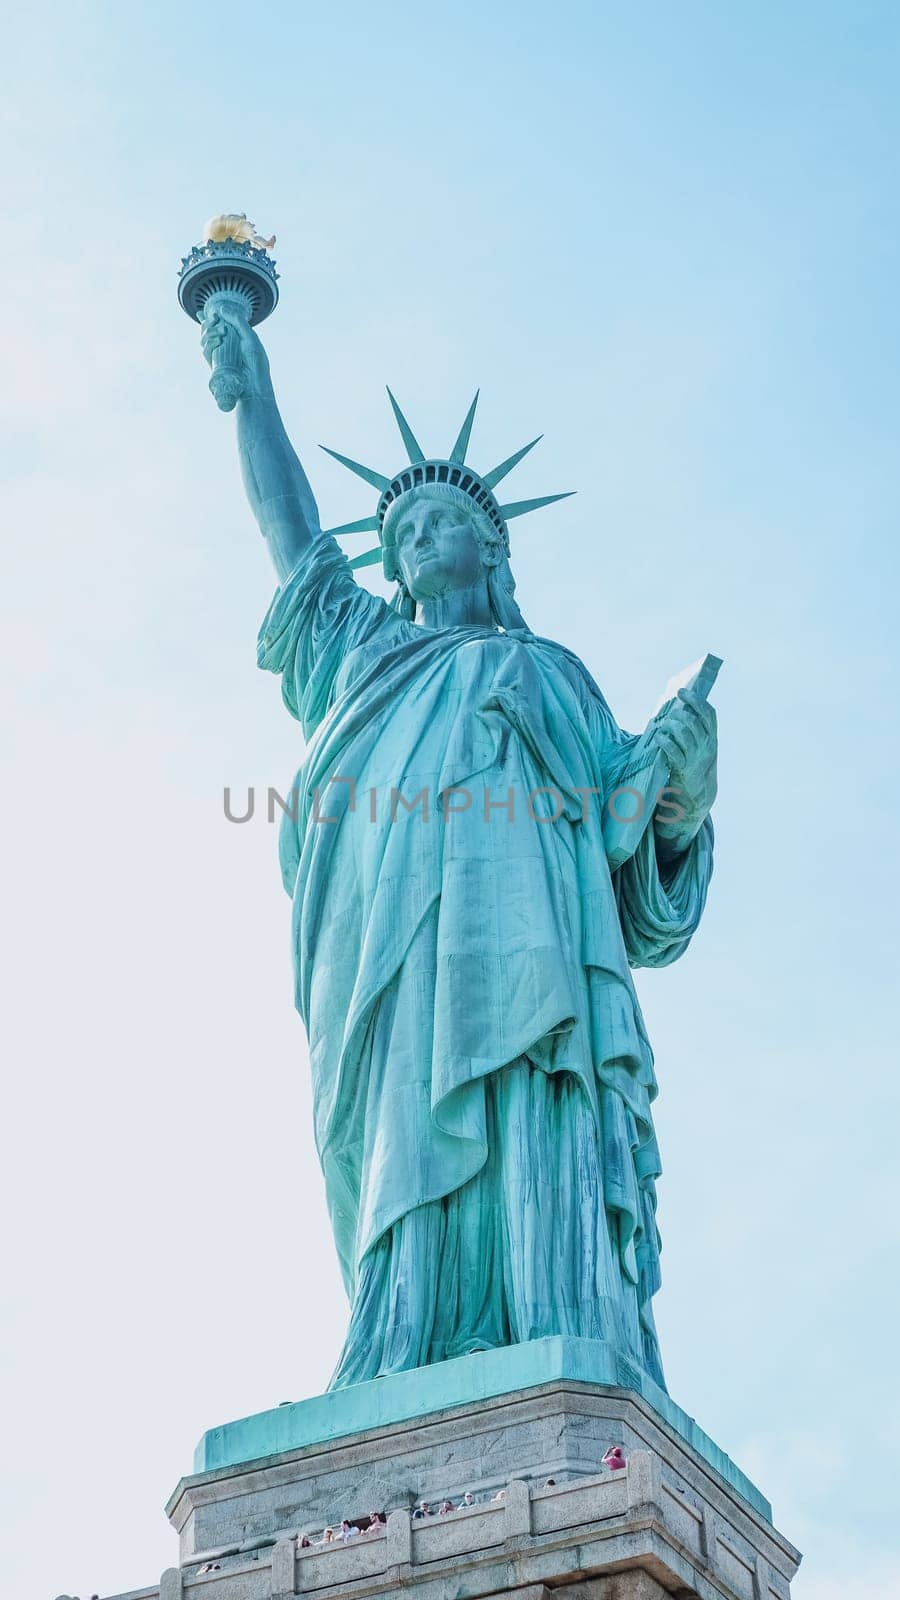 The Statue of Liberty, New York City on sunny blue sky. American symbol. Memorial day, Patriot Day. Space for text. New York NY USA 2023-07-30.